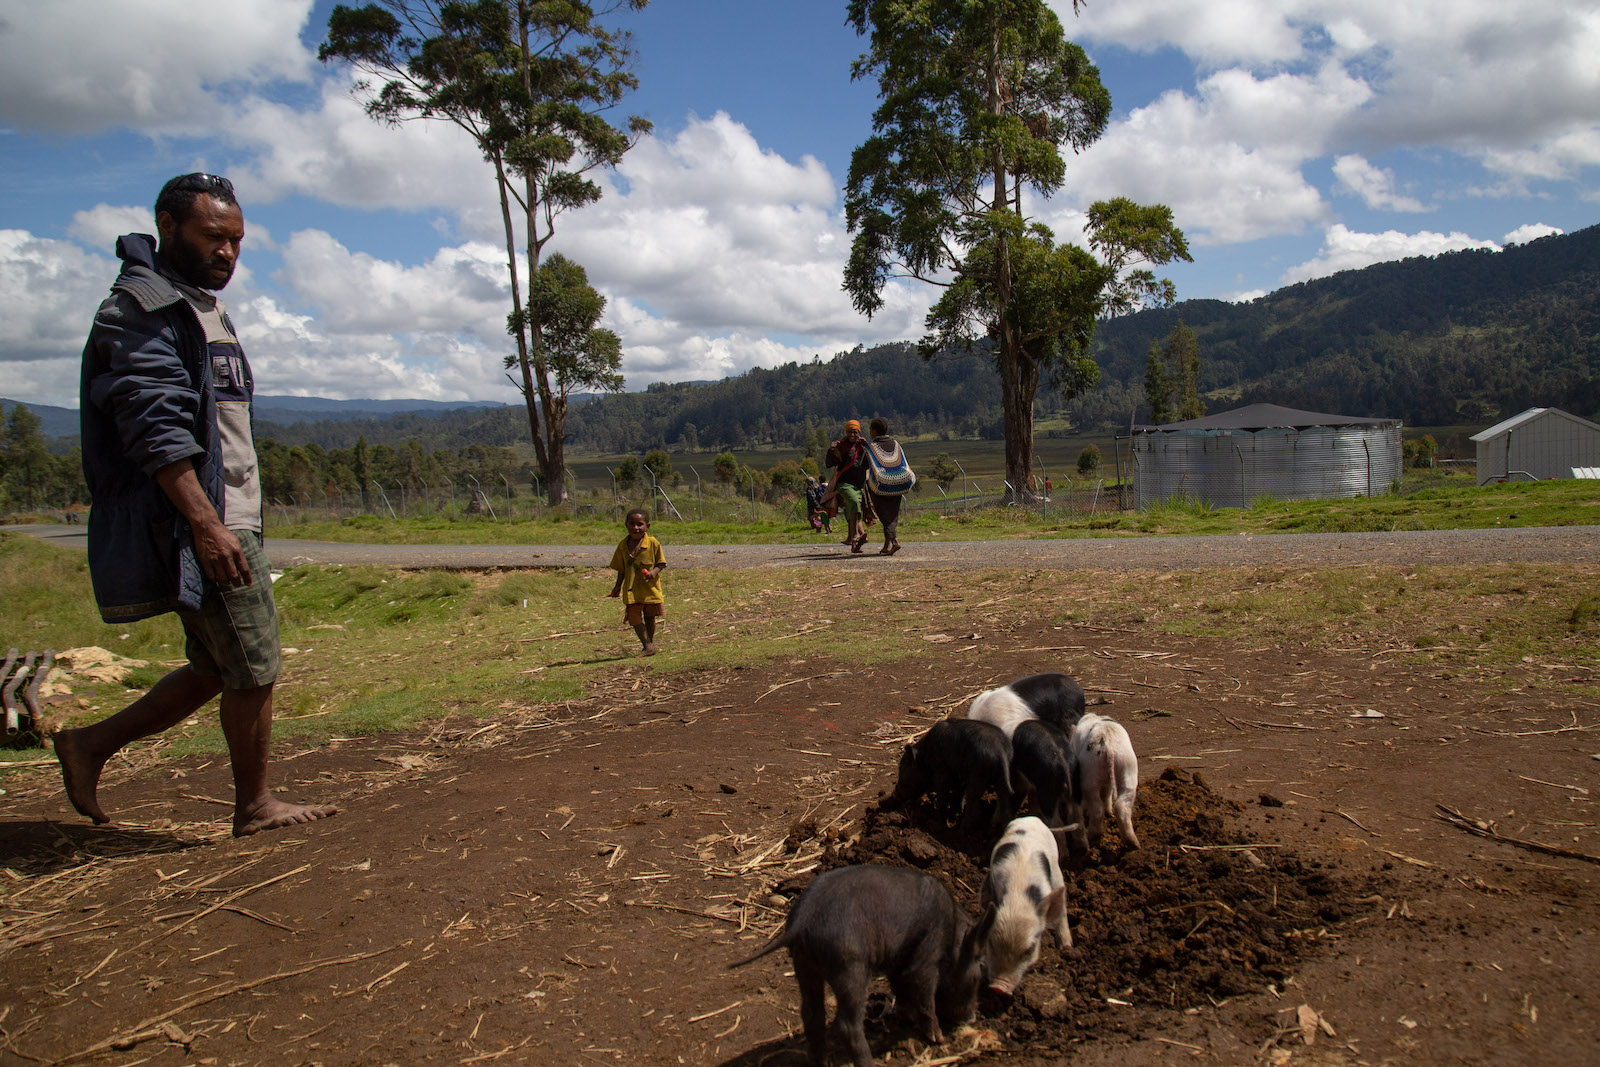 A man walks by pigs in a mountain area